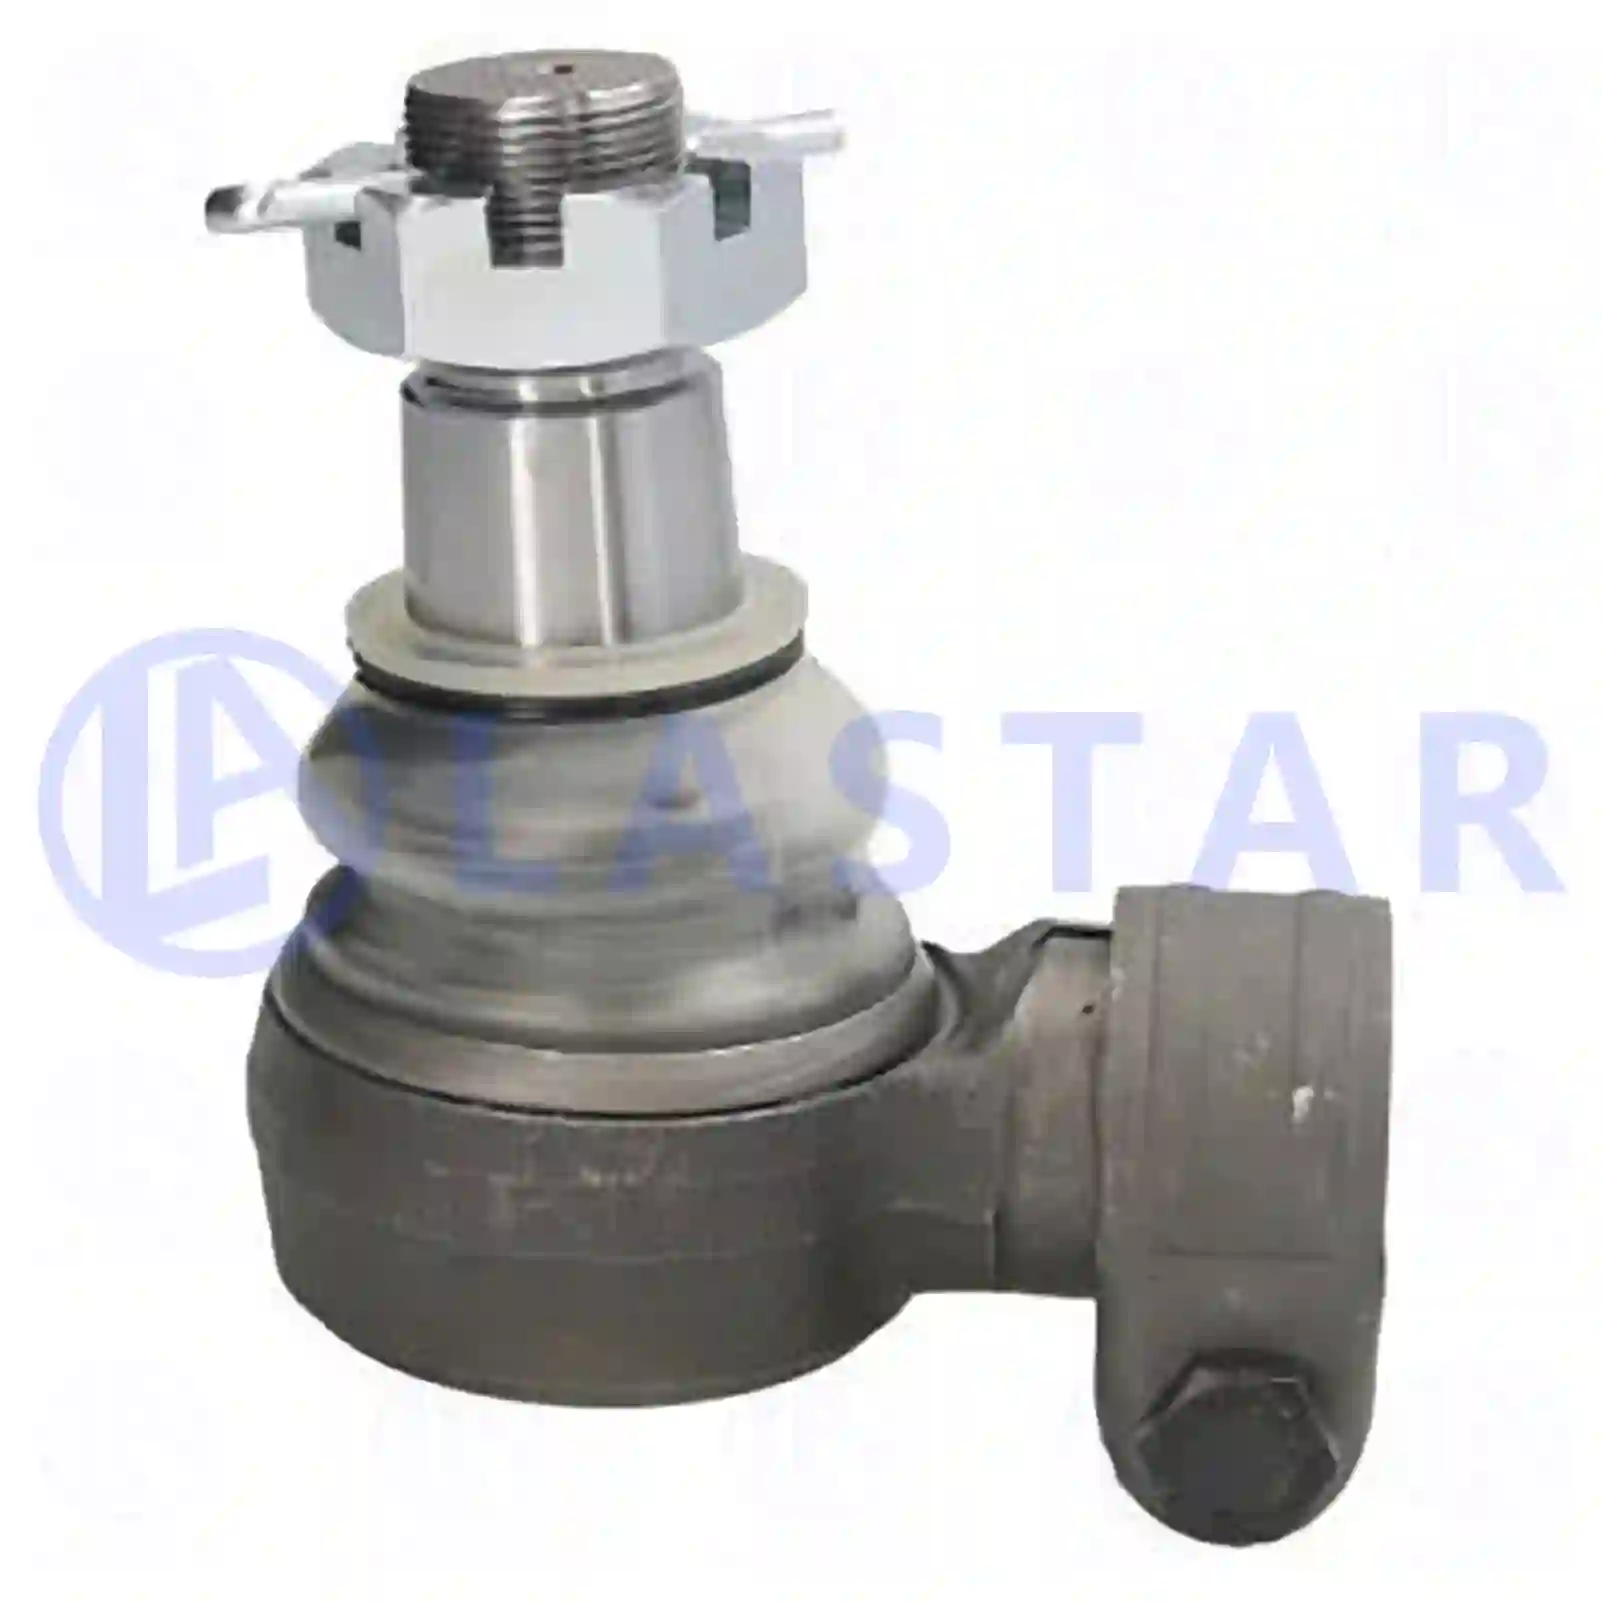 Steering Cylinder Ball joint, right hand thread, la no: 77705316 ,  oem no:00166467, 98166467, 1212146, 1271125, 4143415, 7364001574, 42530316, 42538047, 93157156, 98166467, 81953016232, 011019986, 5001823718, 281953016232, 7364001574, 3090292, 3099129, ZG40407-0008 Lastar Spare Part | Truck Spare Parts, Auotomotive Spare Parts